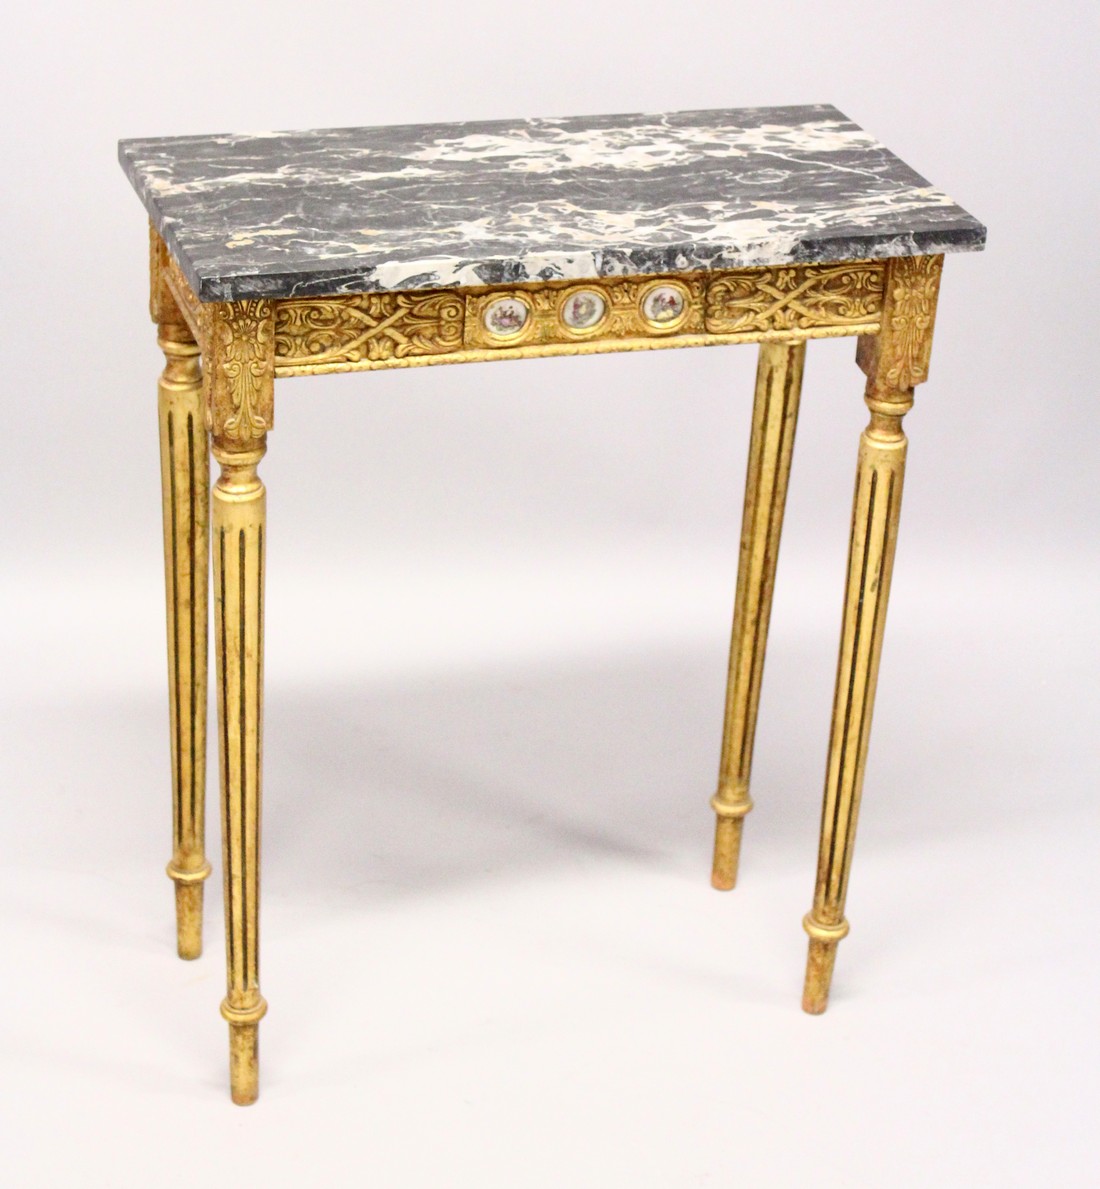 A SMALL GILDED SIDE TABLE, with marble top porcelain panels on turned tapering legs. 2ft long